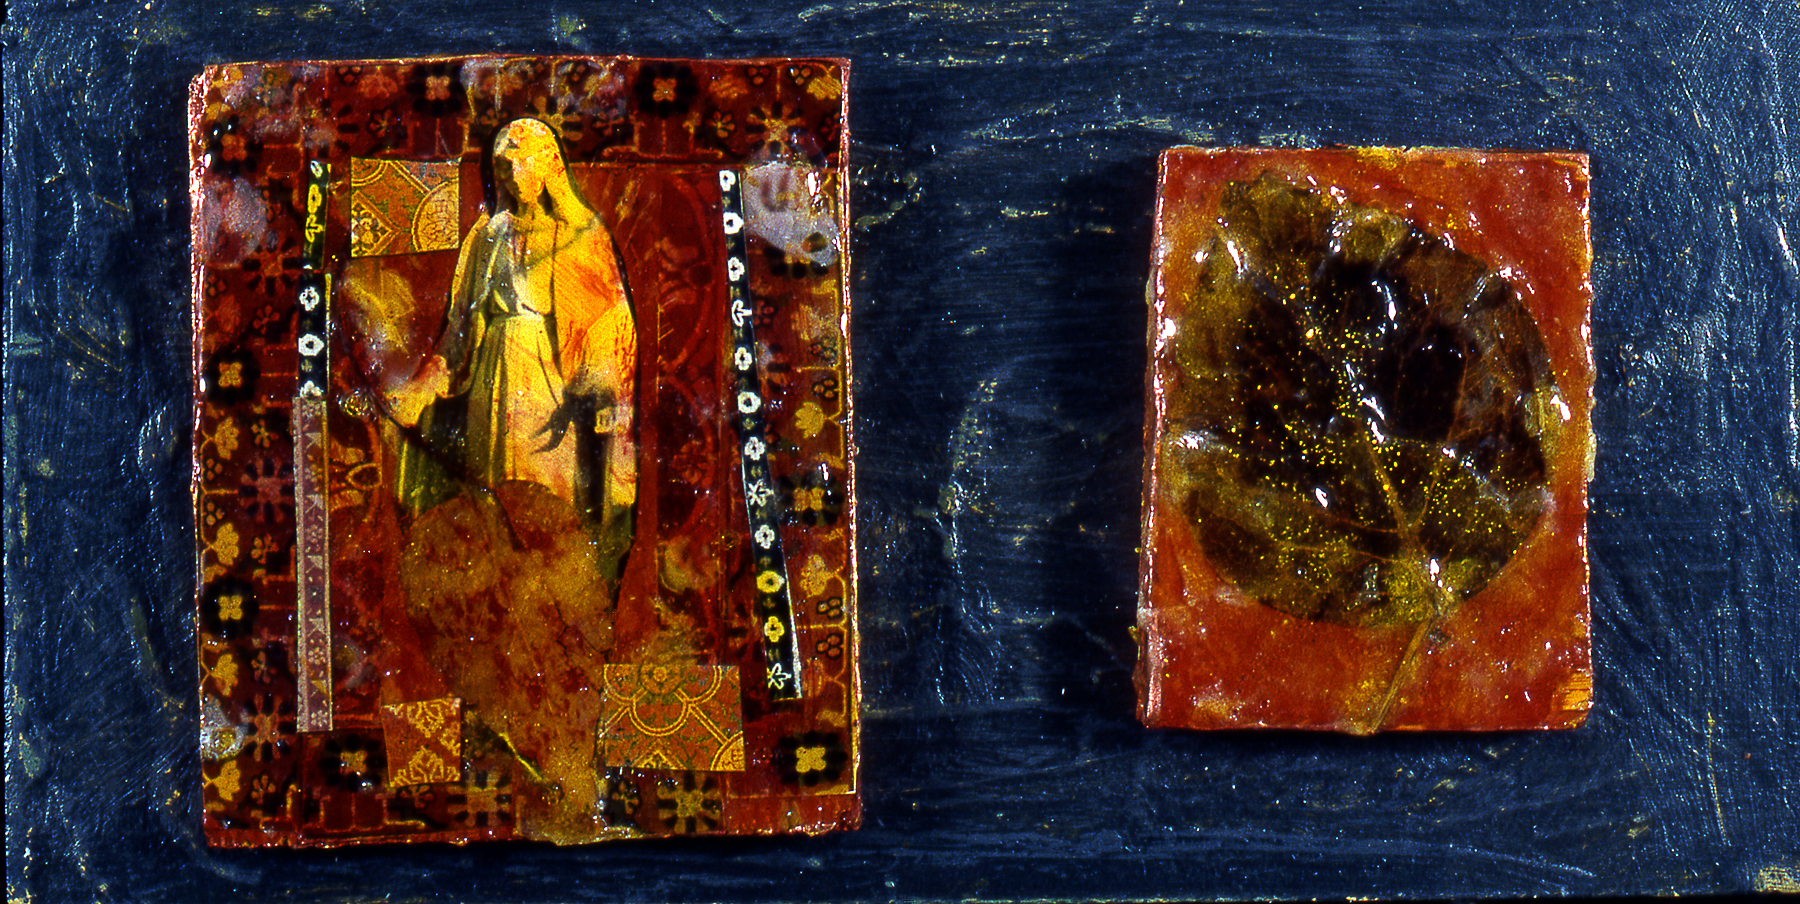 Mary Leaf relic, 1999, mixed media on wood panel, $250